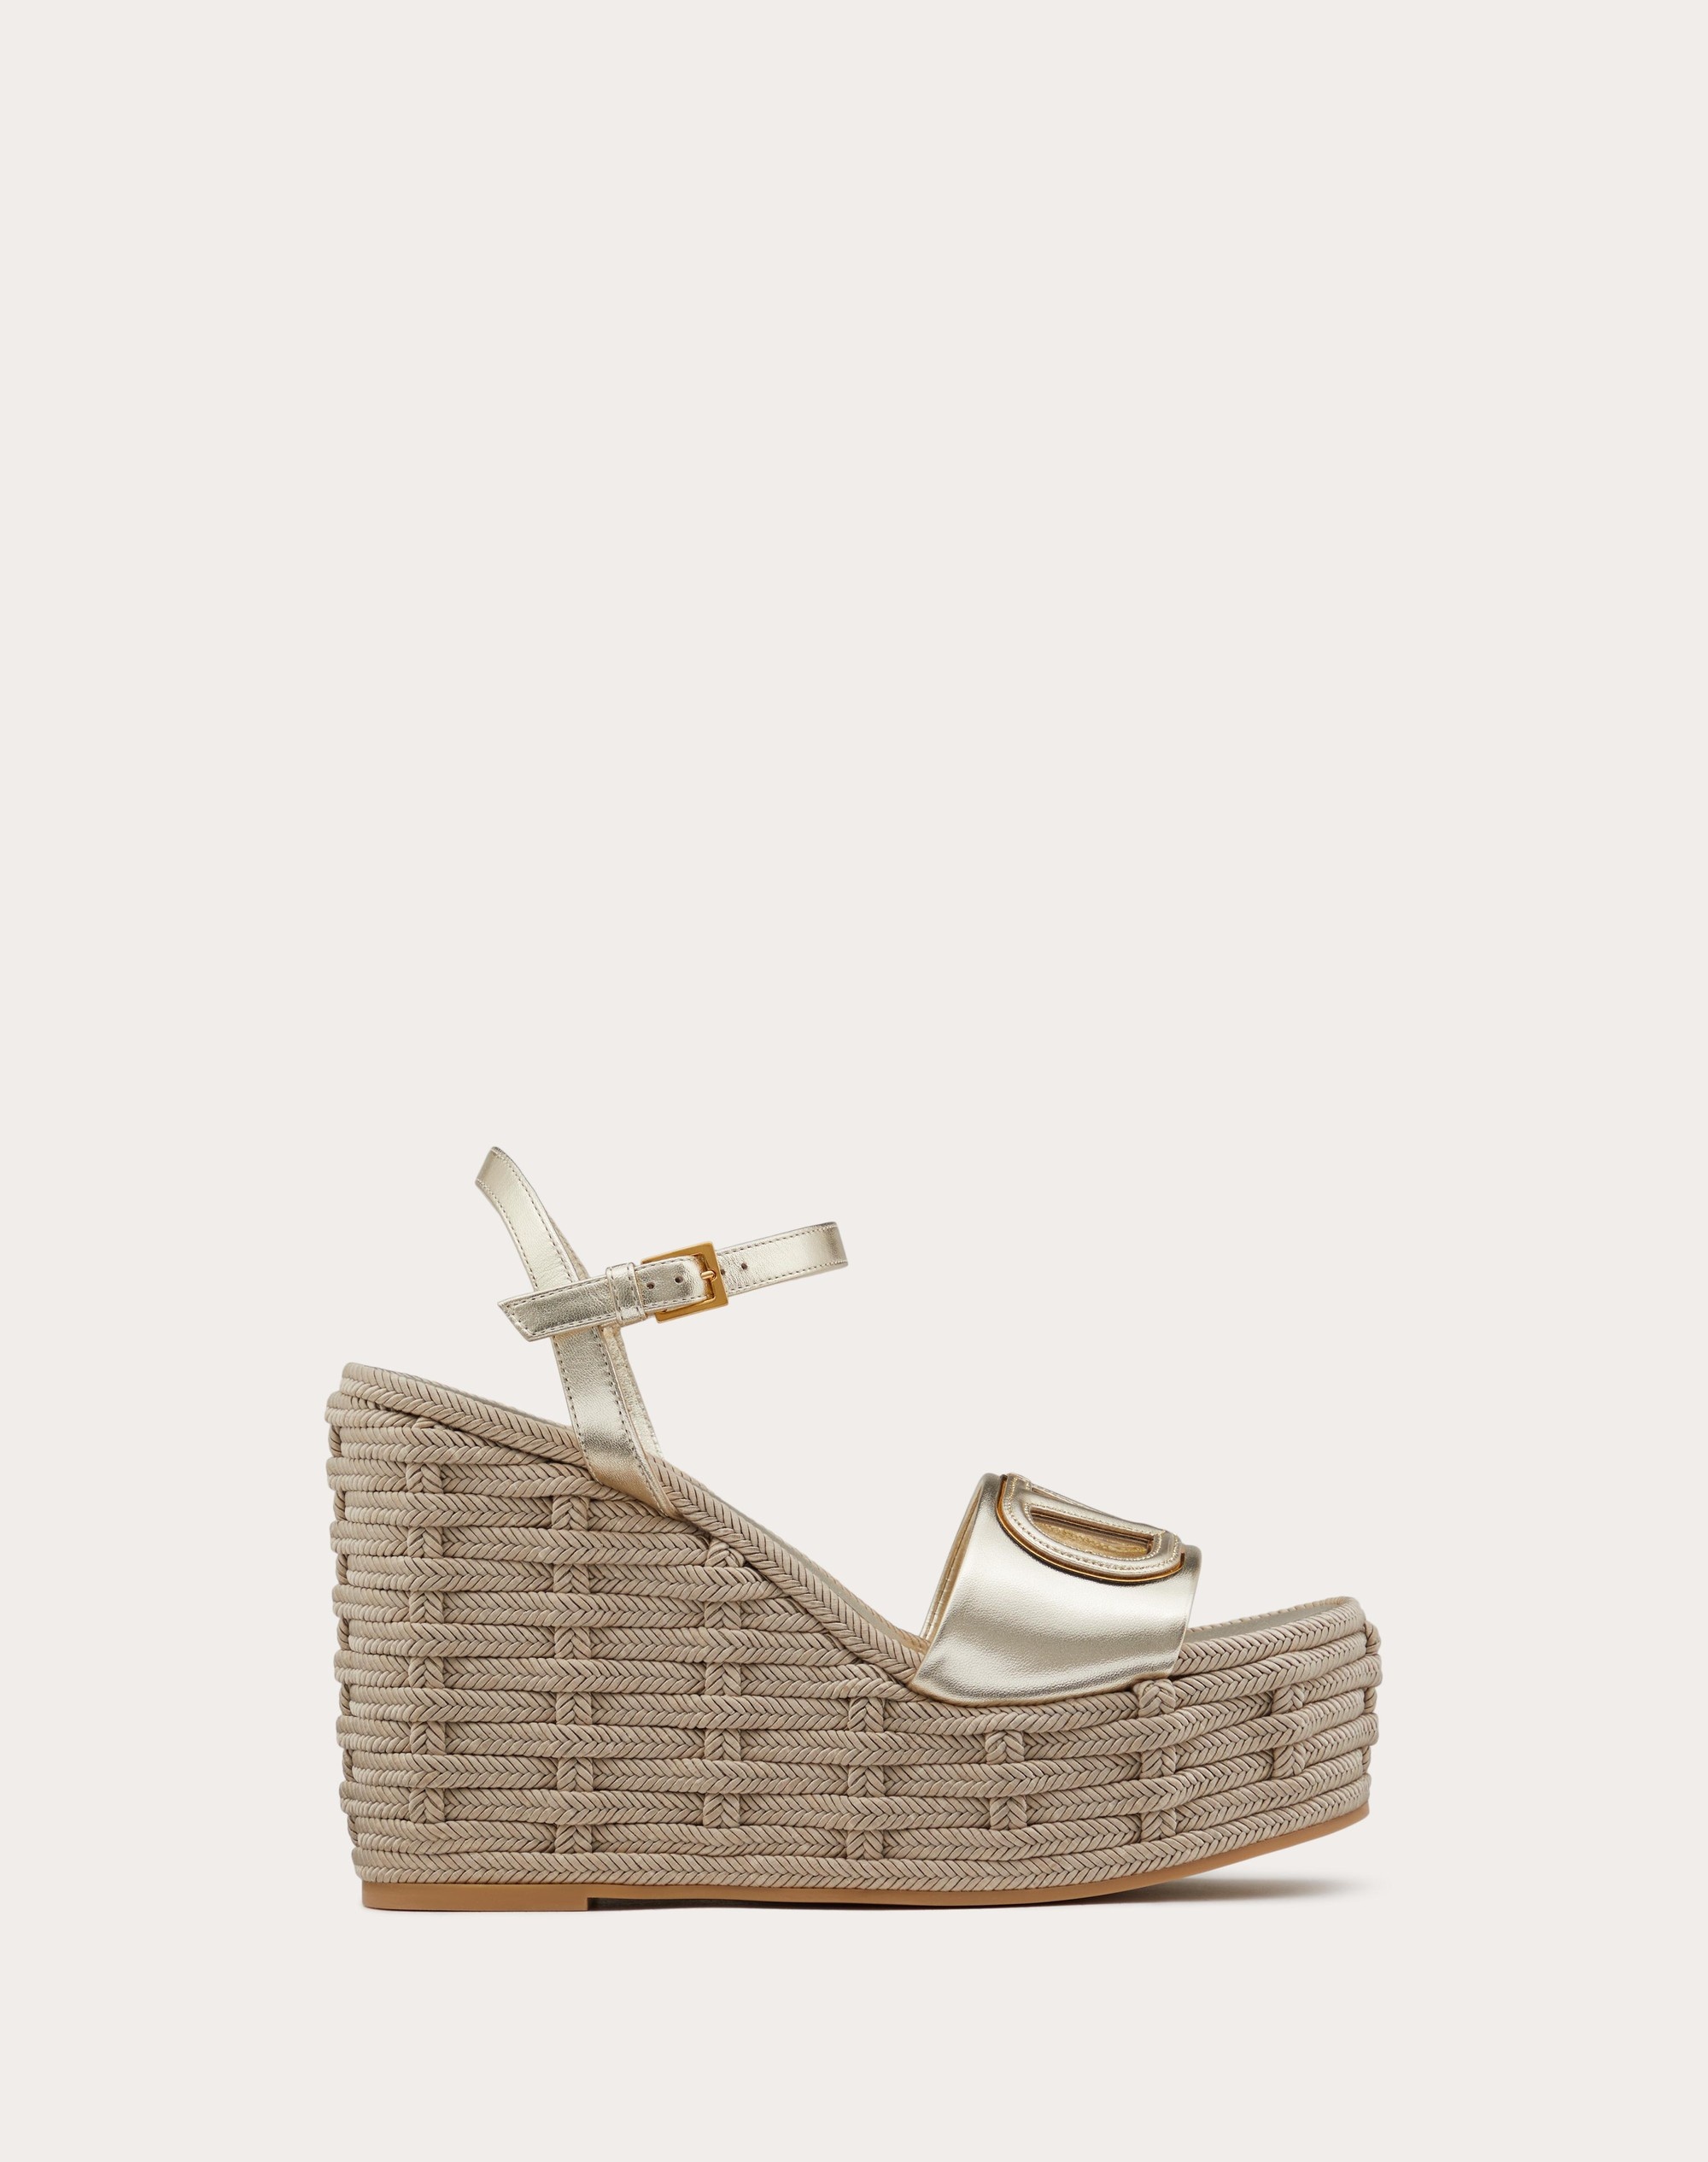 VLOGO CUT-OUT WEDGE SANDAL IN LAMINATED NAPPA LEATHER 110MM - 1